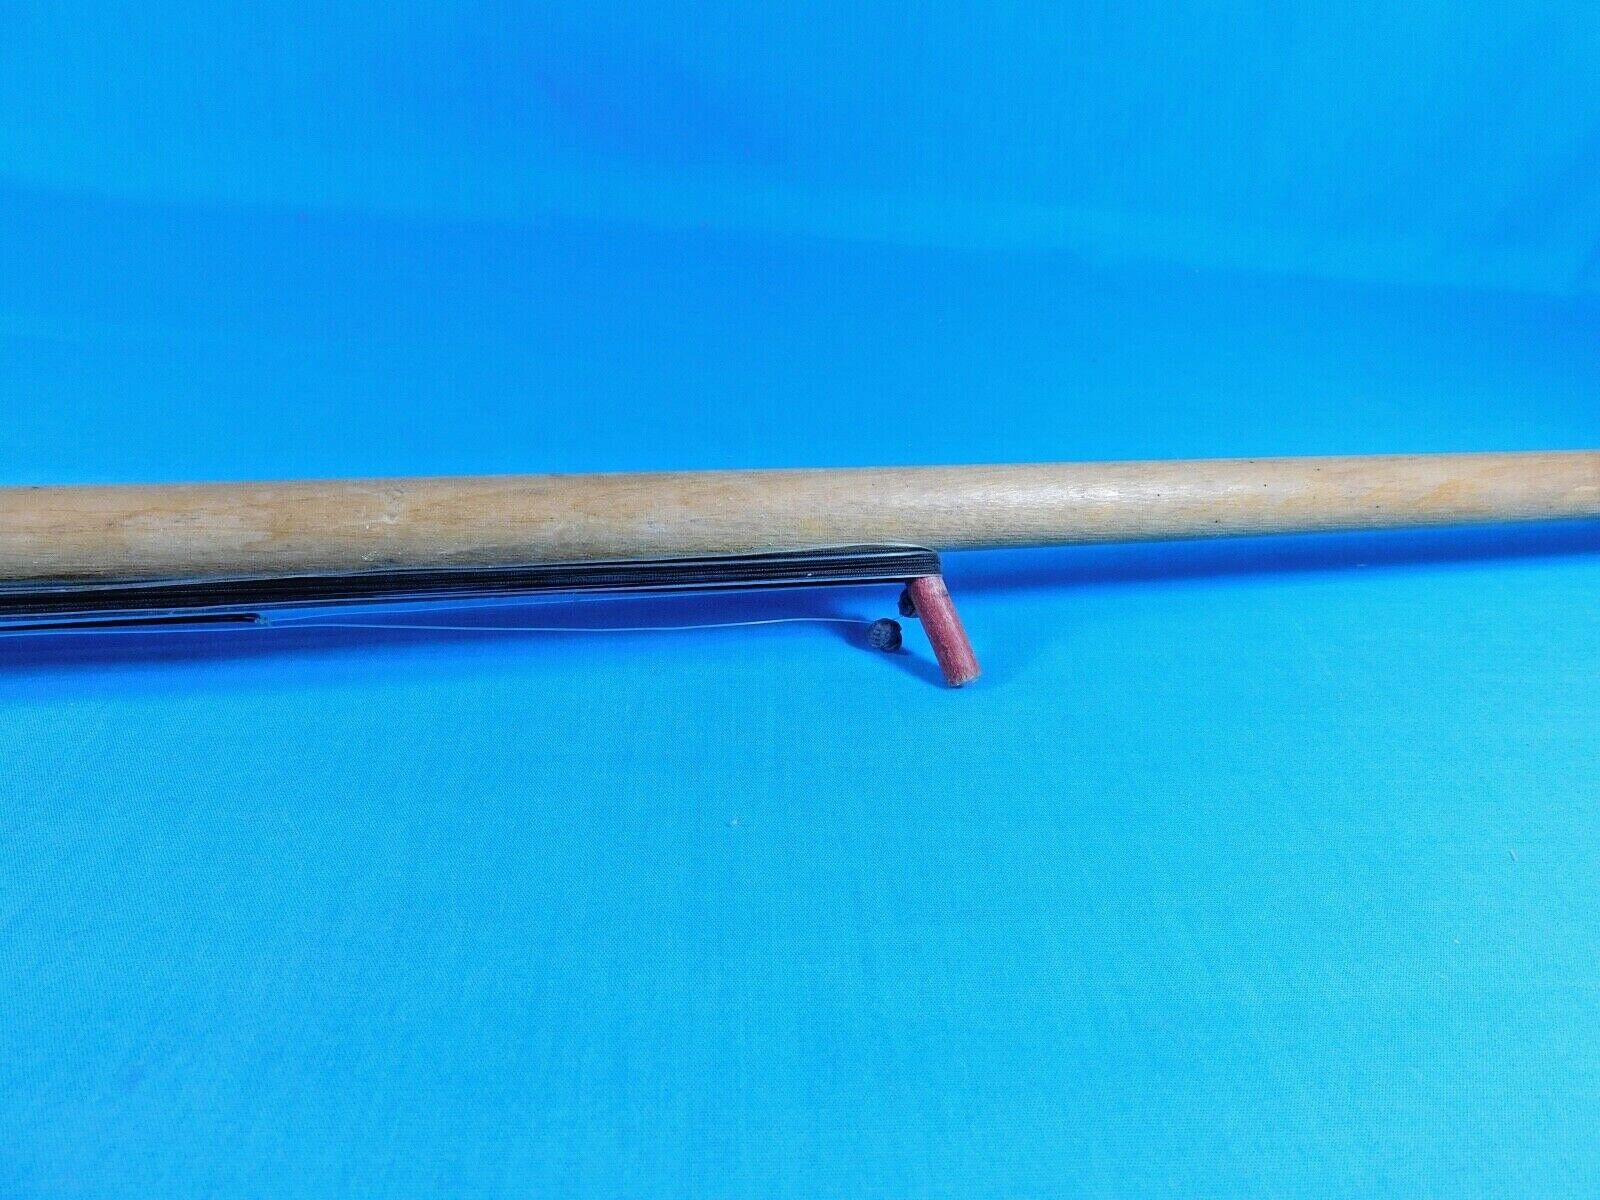 VINTAGE ICE FISHING POLE WOODEN RUBBER HANDLE SPIKE END WONDERFUL